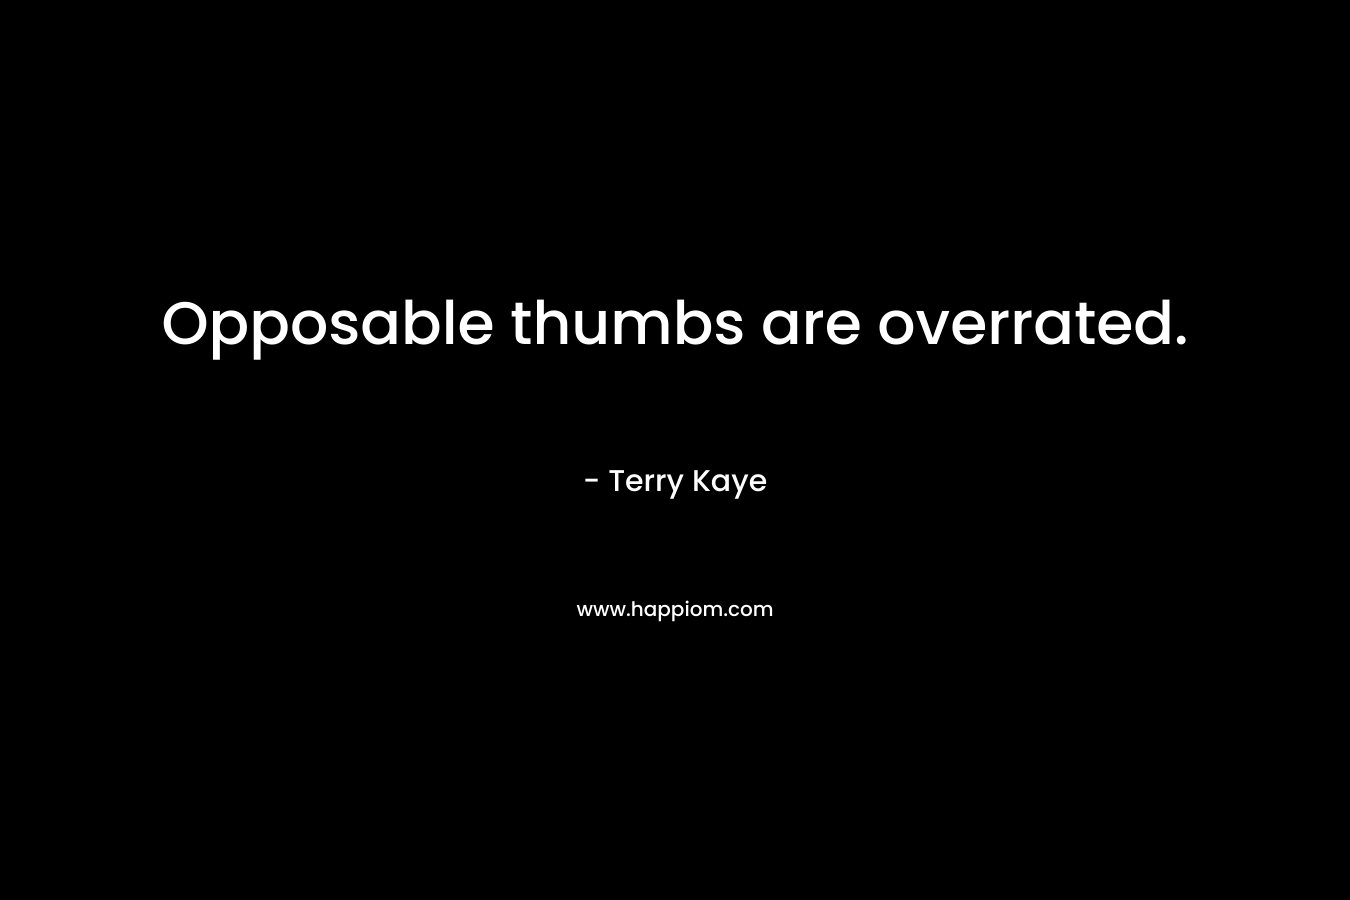 Opposable thumbs are overrated. – Terry Kaye